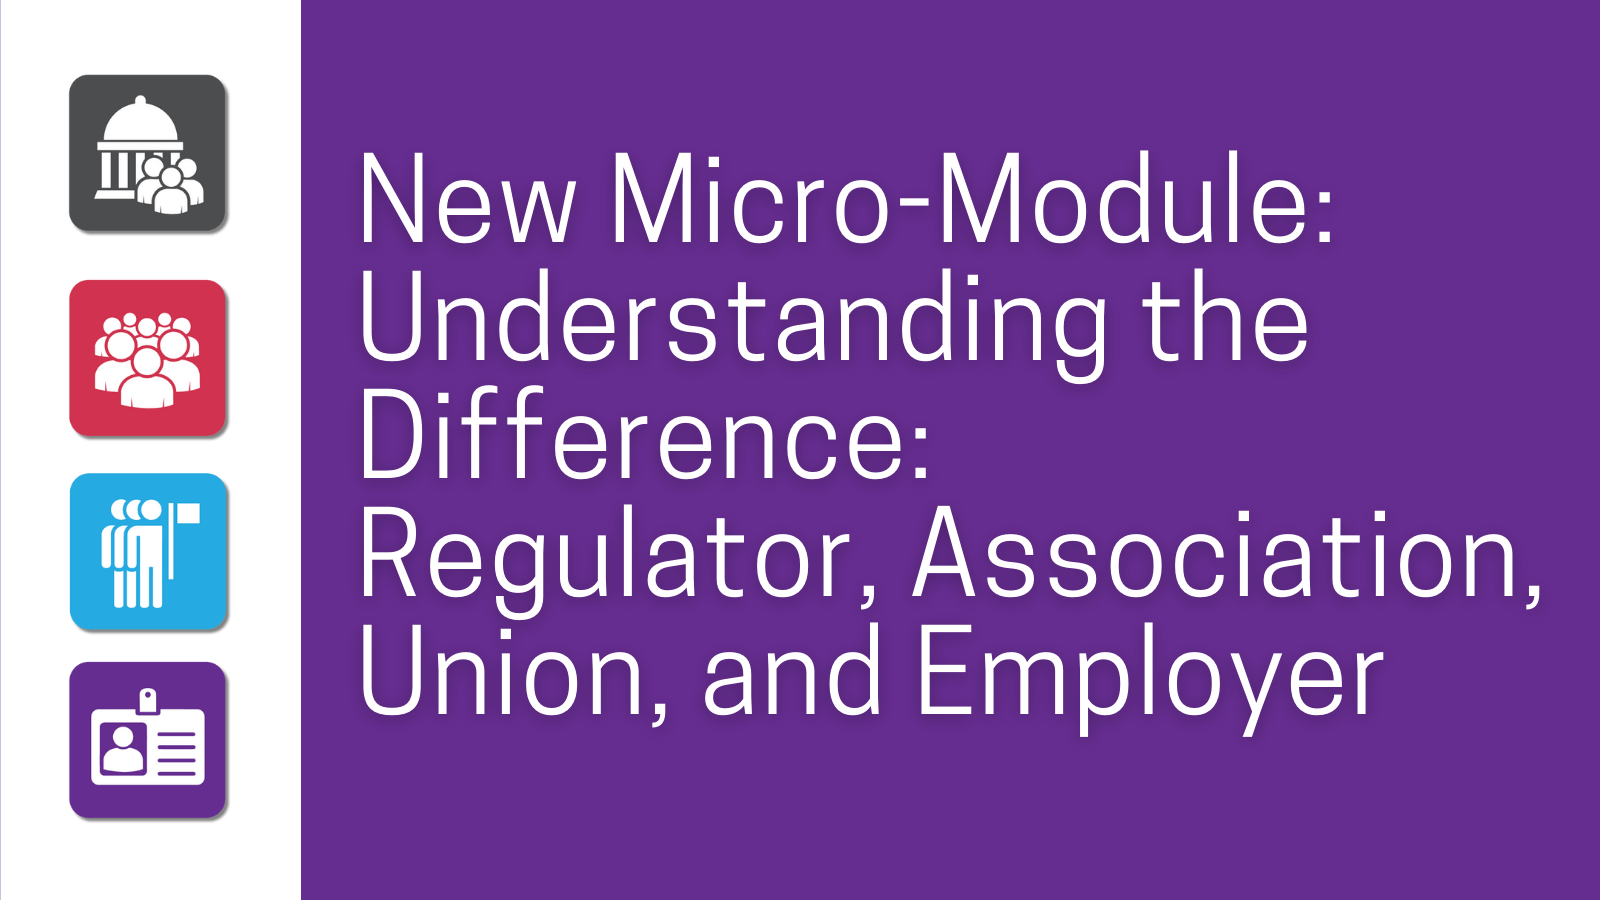 New Module: Understanding the Difference: Regulator, Association, Union, and Employer